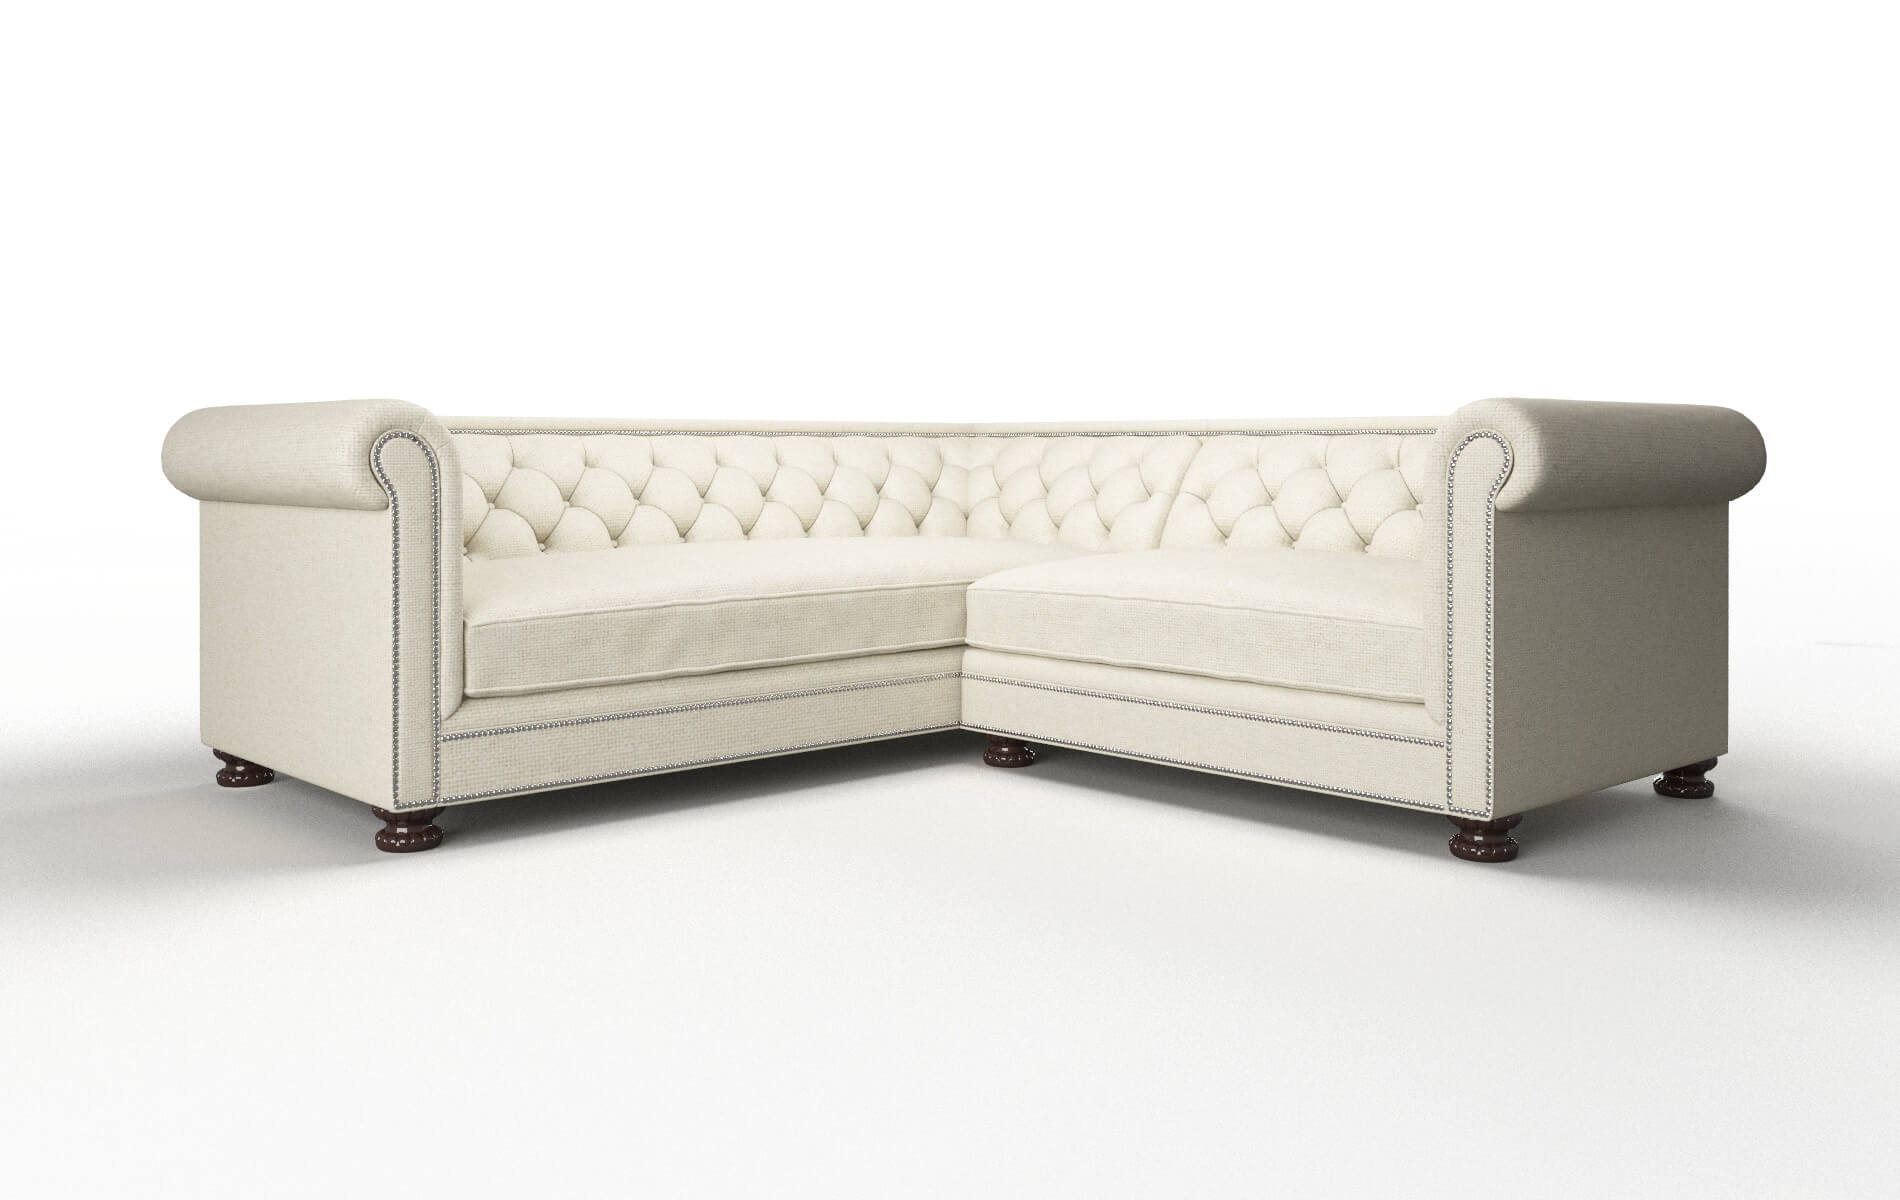 Athens Redondo Oyster Sectional espresso legs